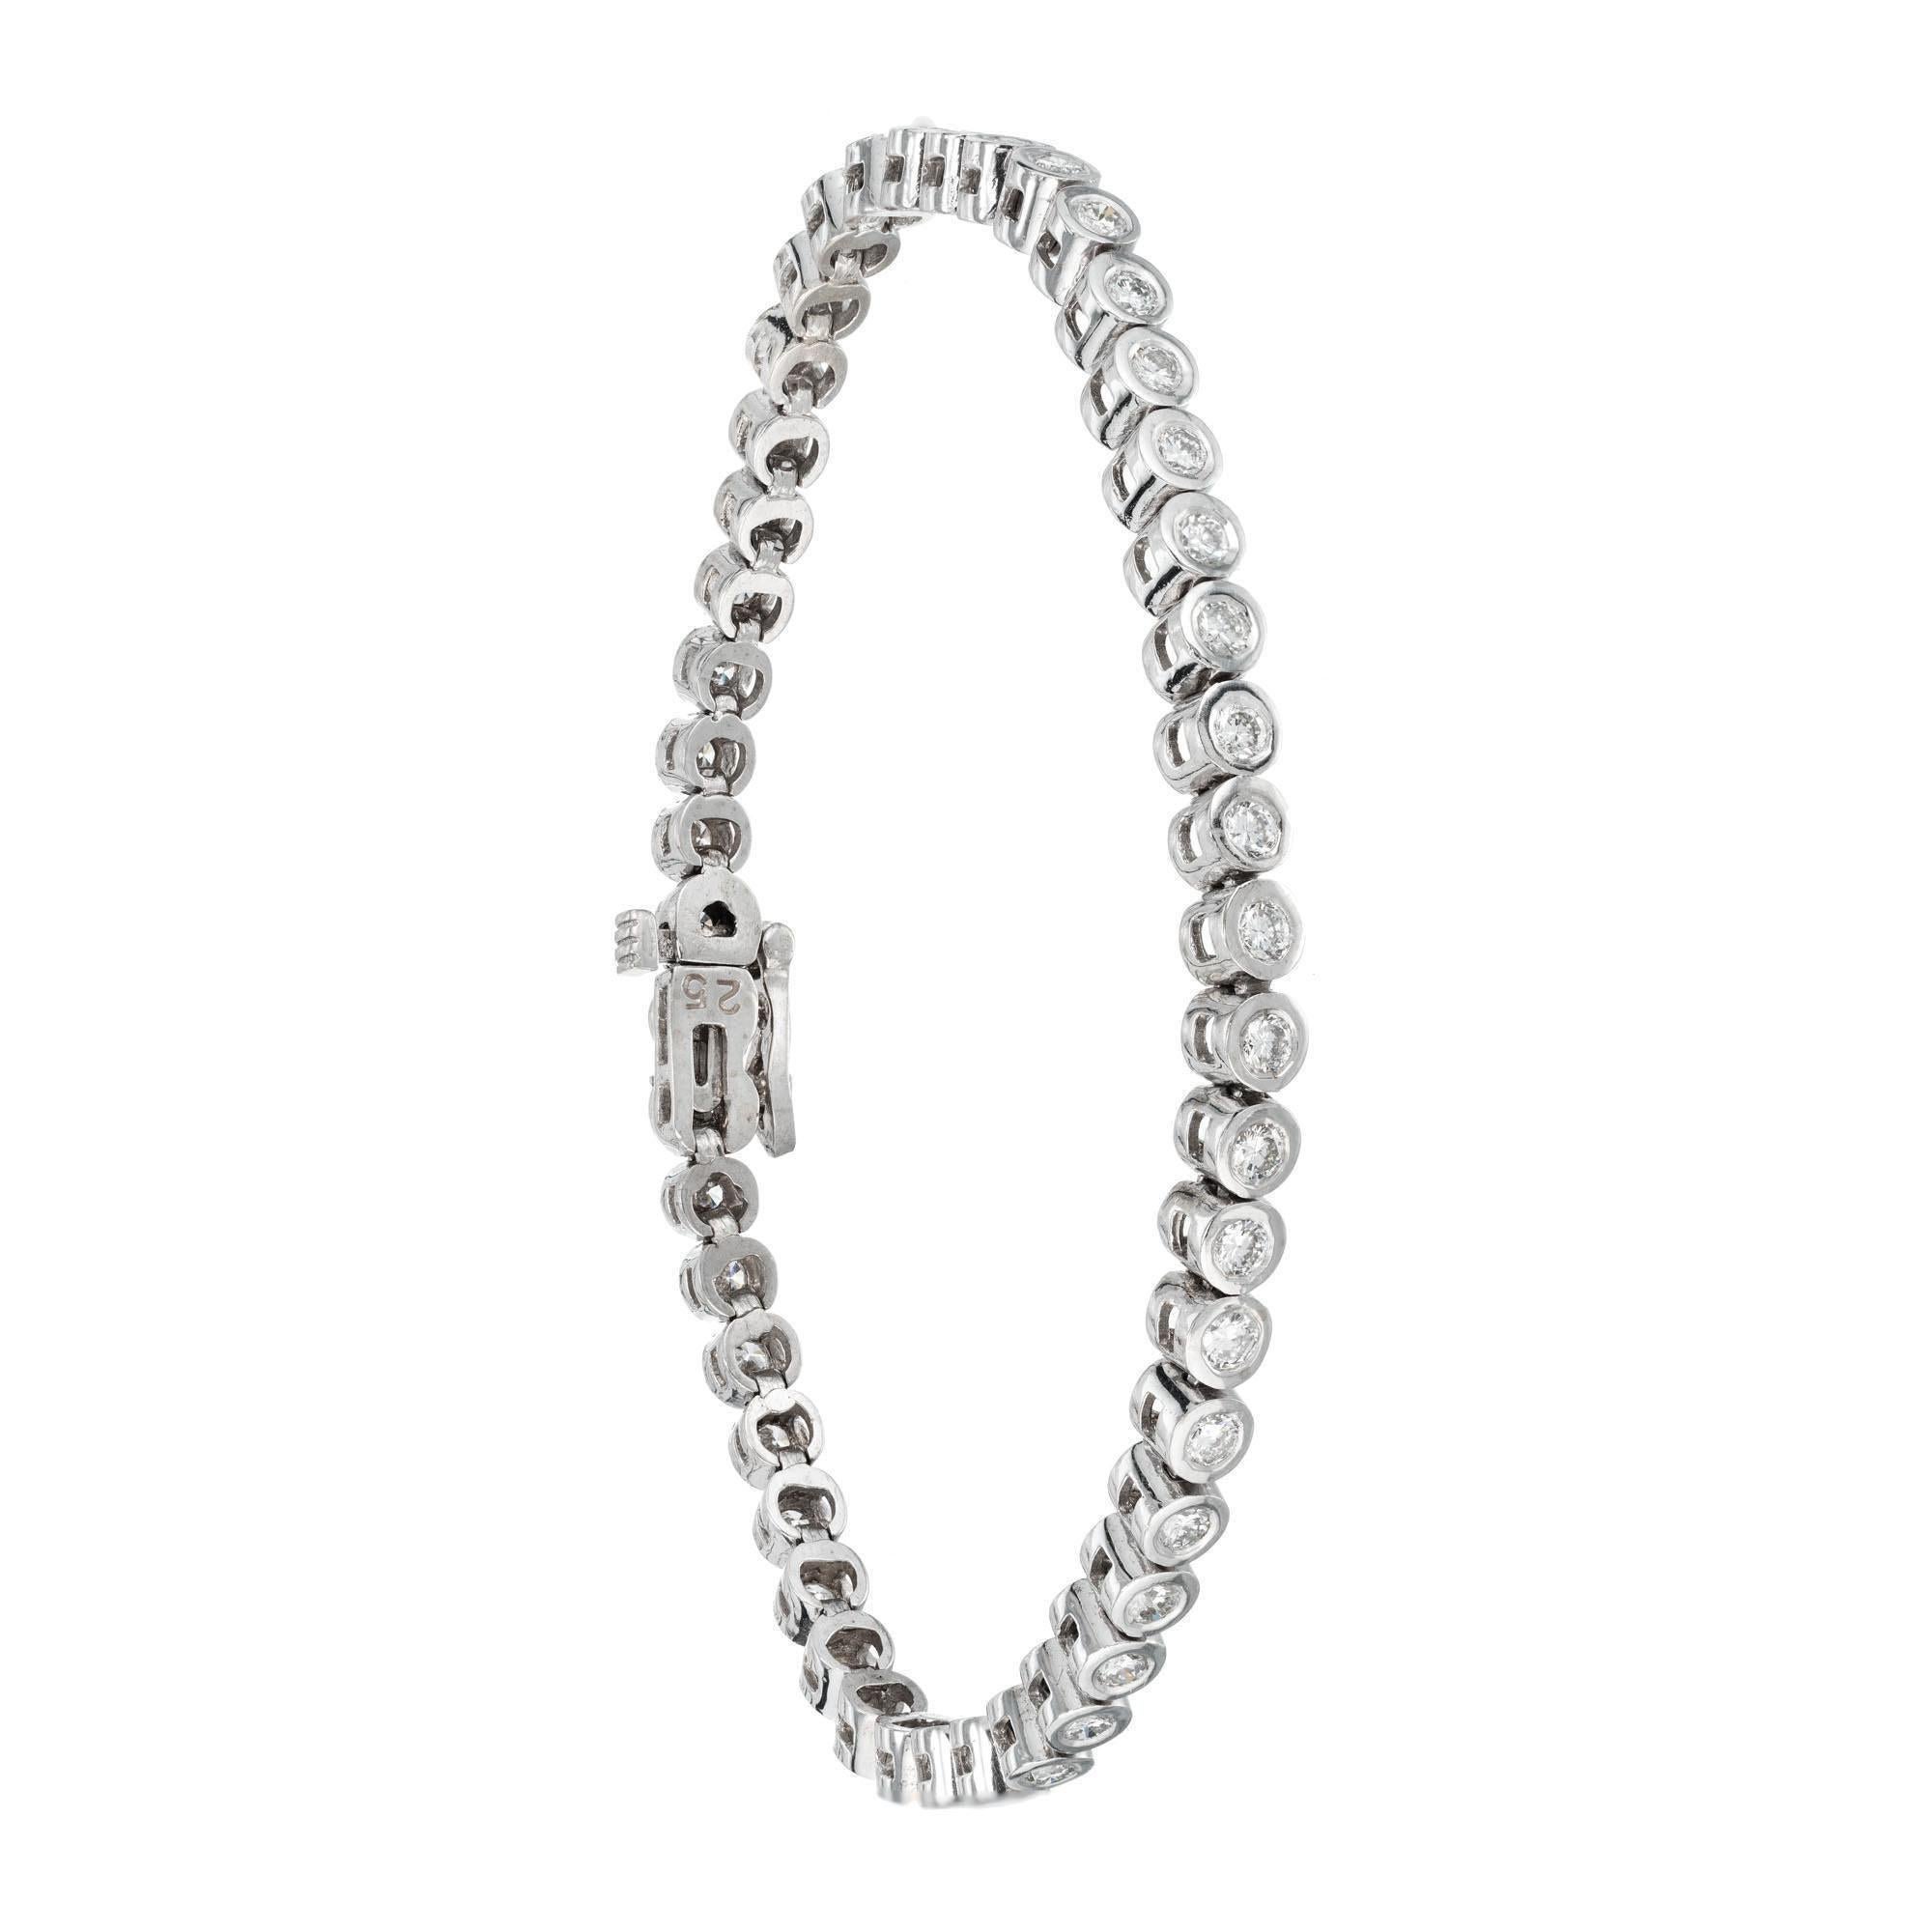 Round diamond bezel set tennis bracelet. 2.50 carats of 47 round diamonds set in 14k white gold bezels. Length 7.50 inches. Created in the Peter Suchy Workshop. 

47 round diamonds, approx total weight: 2.50cts G-H, SI1
14k White gold
Length: